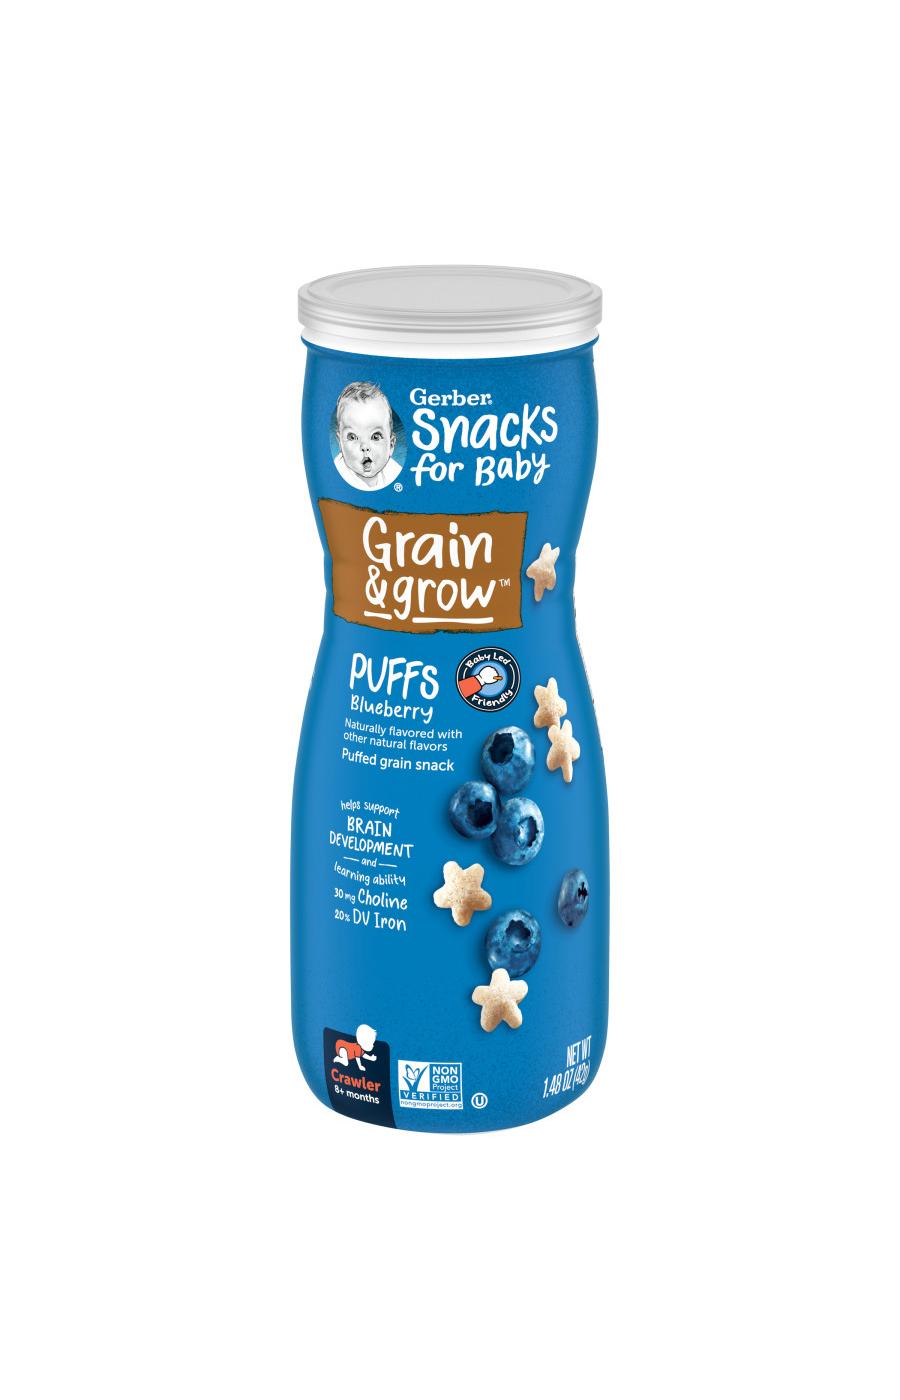 Gerber Snacks for Baby Grain & Grow Puffs - Blueberry; image 1 of 8